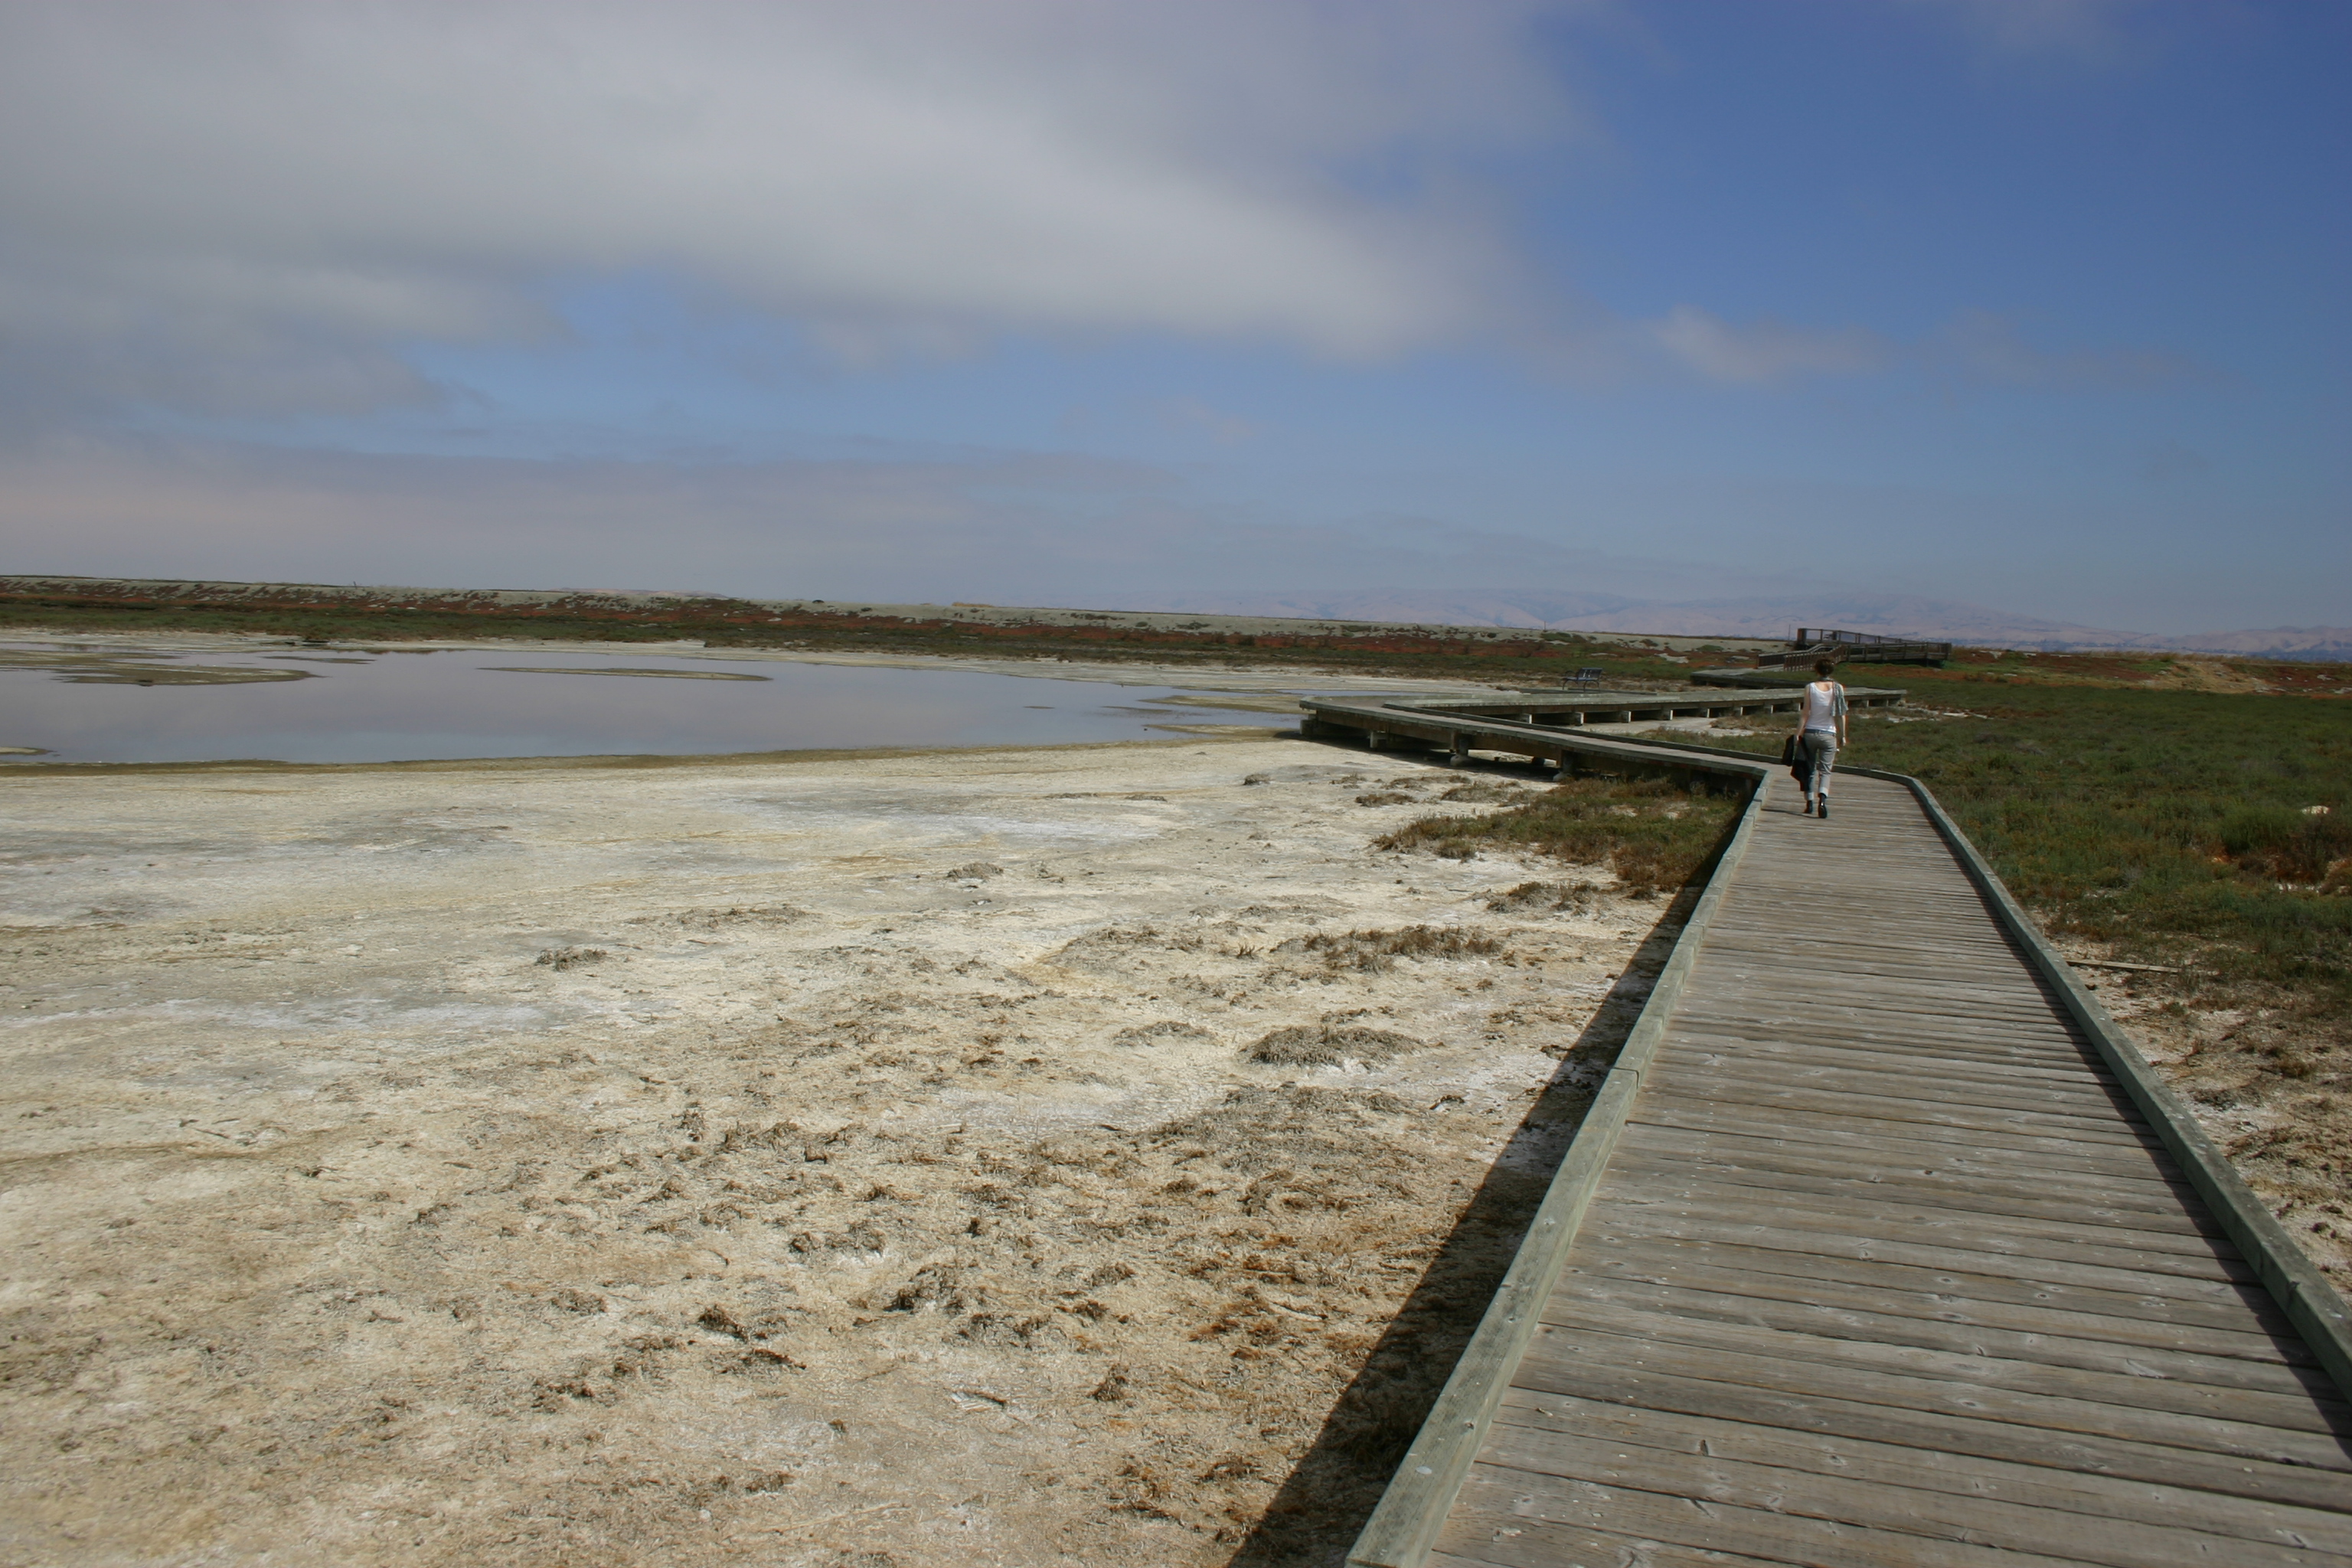 A young woman on the boardwalk at the Alviso salt marshes.